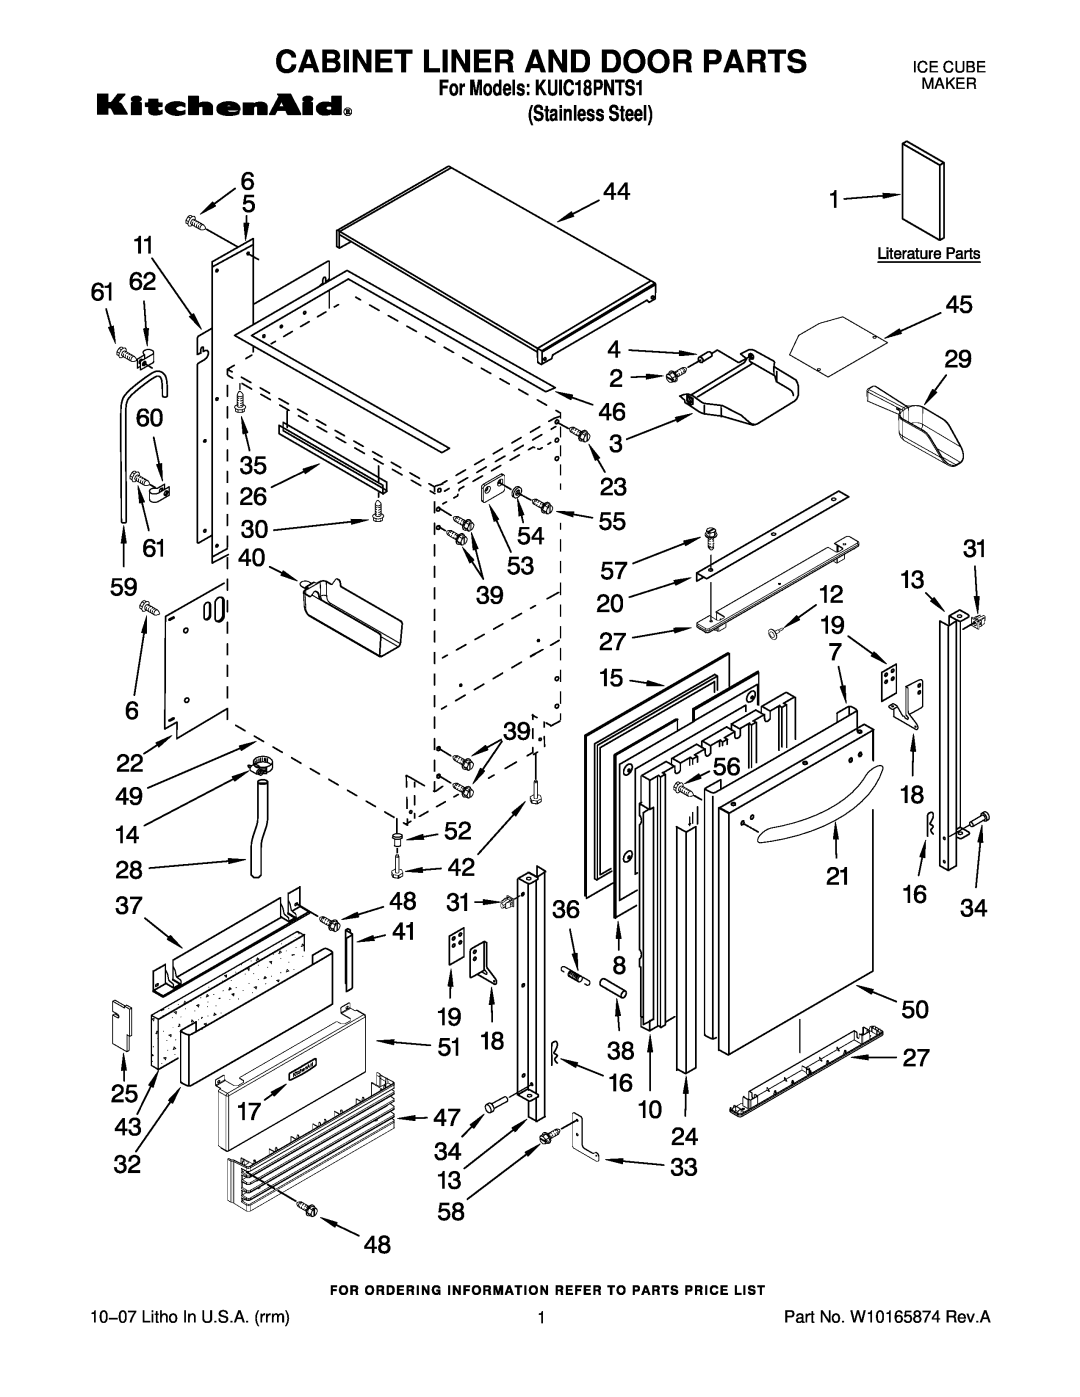 KitchenAid manual Cabinet Liner And Door Parts, For Models KUIC18PNTS1 Stainless Steel, Ice Cube Maker 